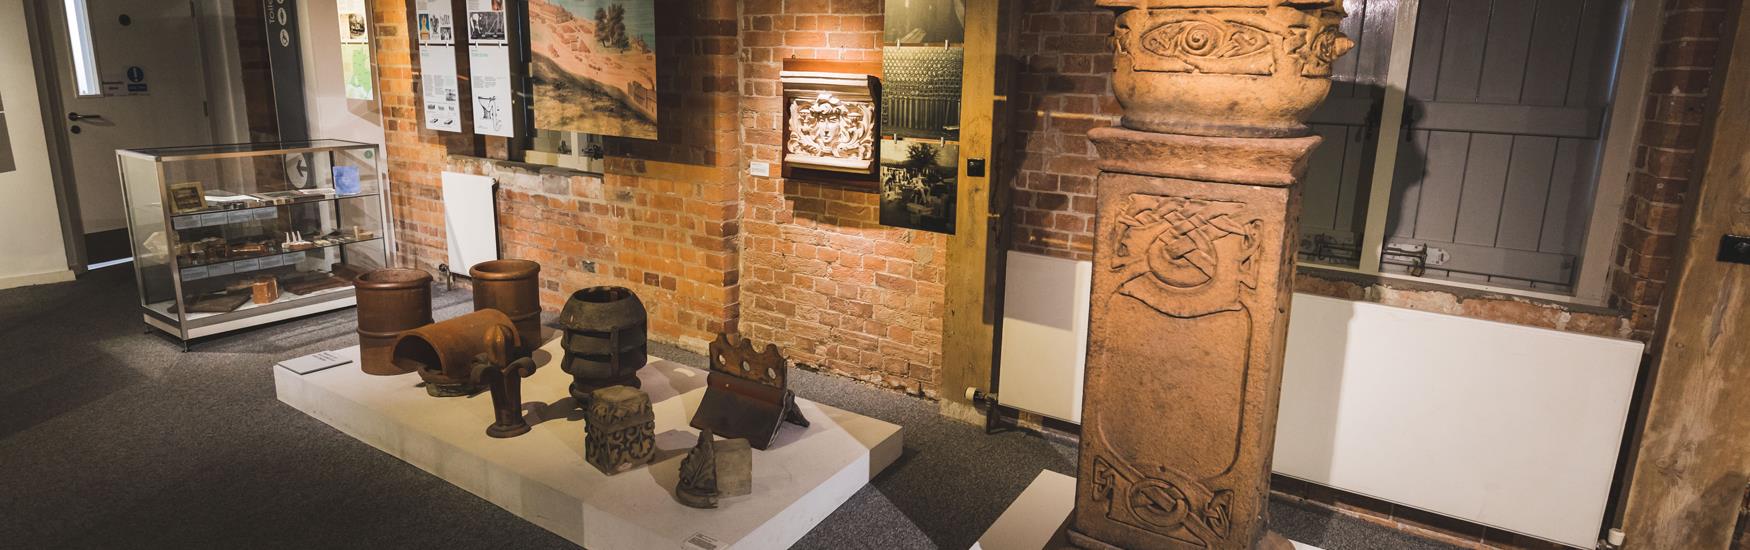 Objects on display in museum, brick wall behind